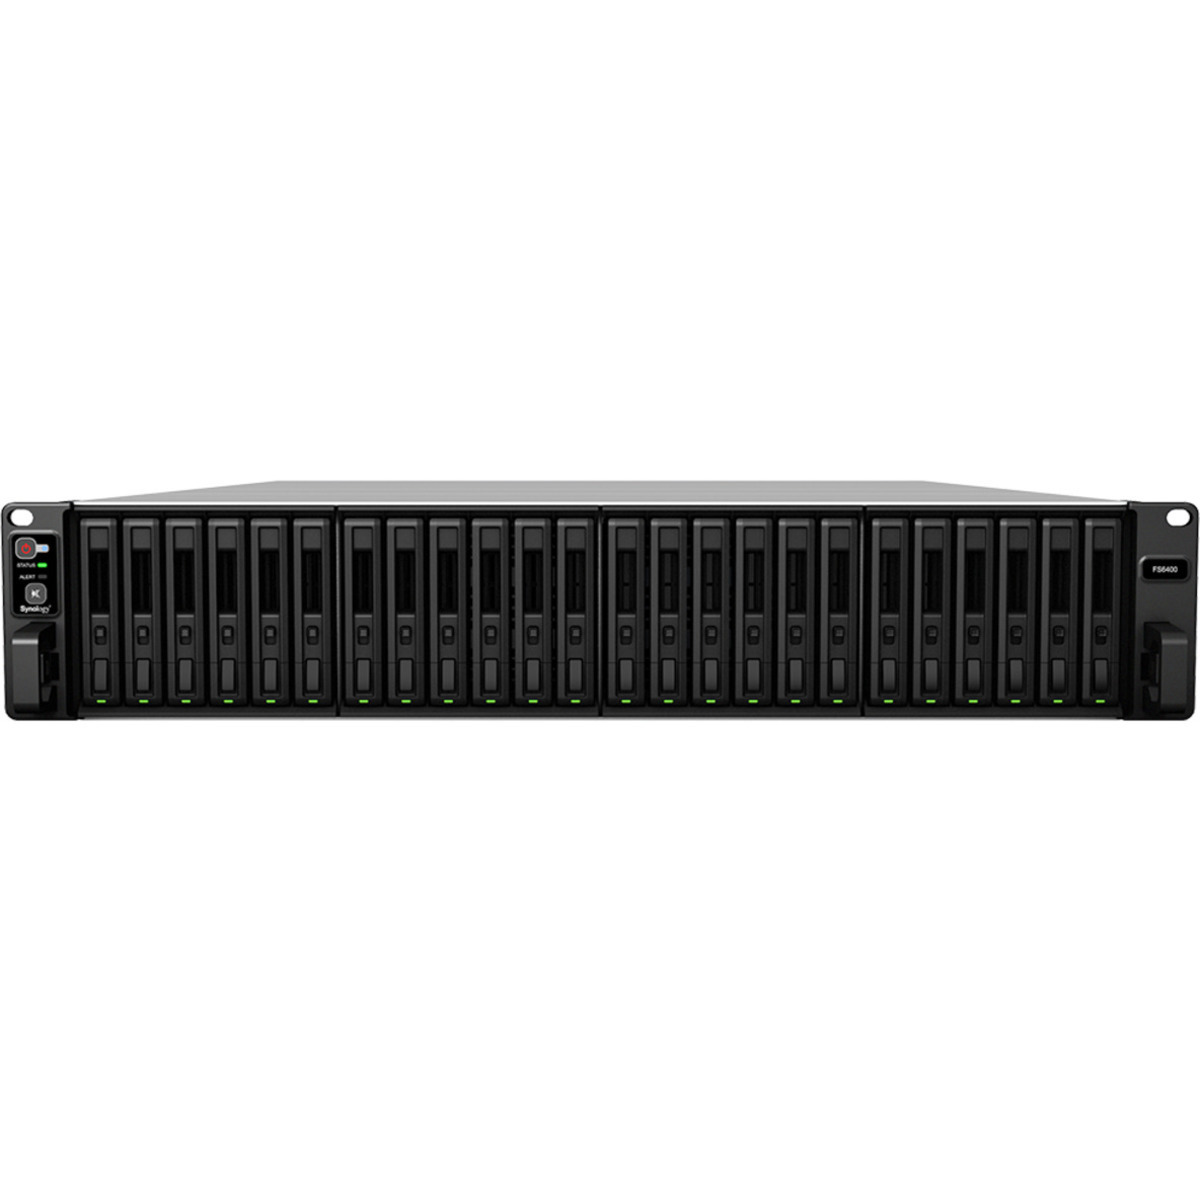 Synology FlashStation FS6400 10tb 24-Bay RackMount Large Business / Enterprise NAS - Network Attached Storage Device 21x480gb Synology SAT5210 Series SAT5210-480G 2.5 530/500MB/s SATA 6Gb/s SSD ENTERPRISE Class Drives Installed - Burn-In Tested FlashStation FS6400